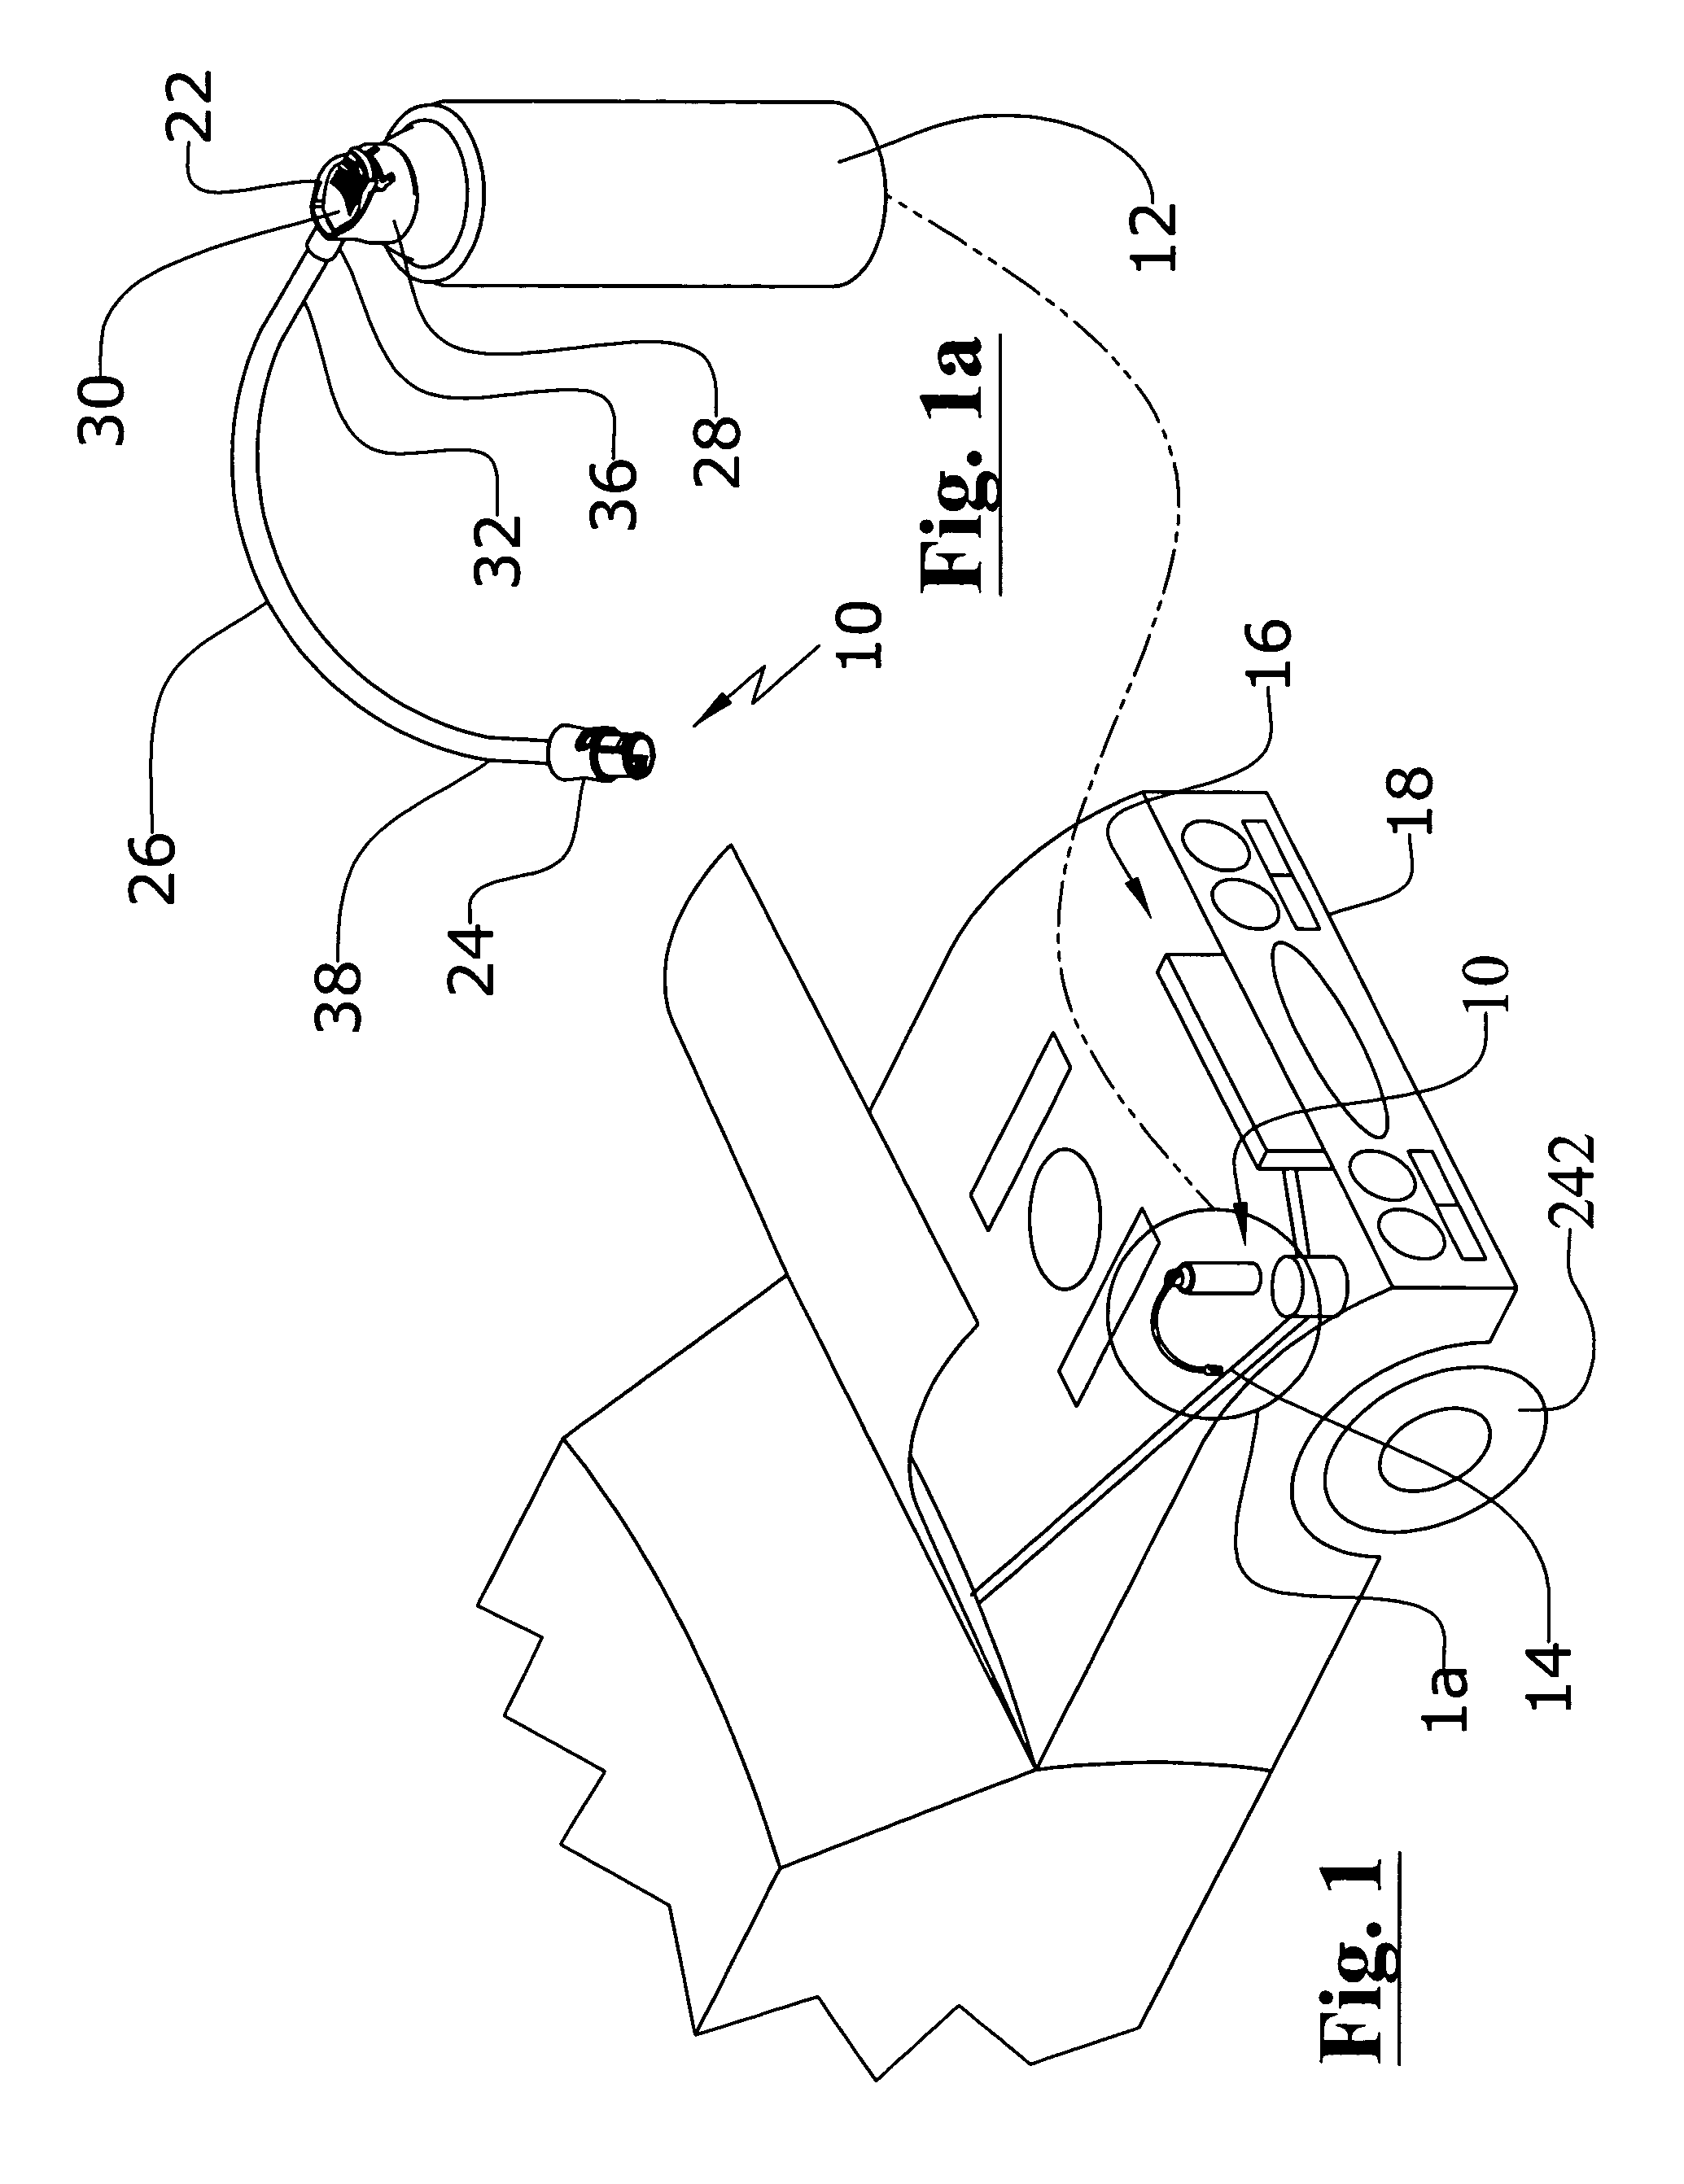 Material transfer device and method